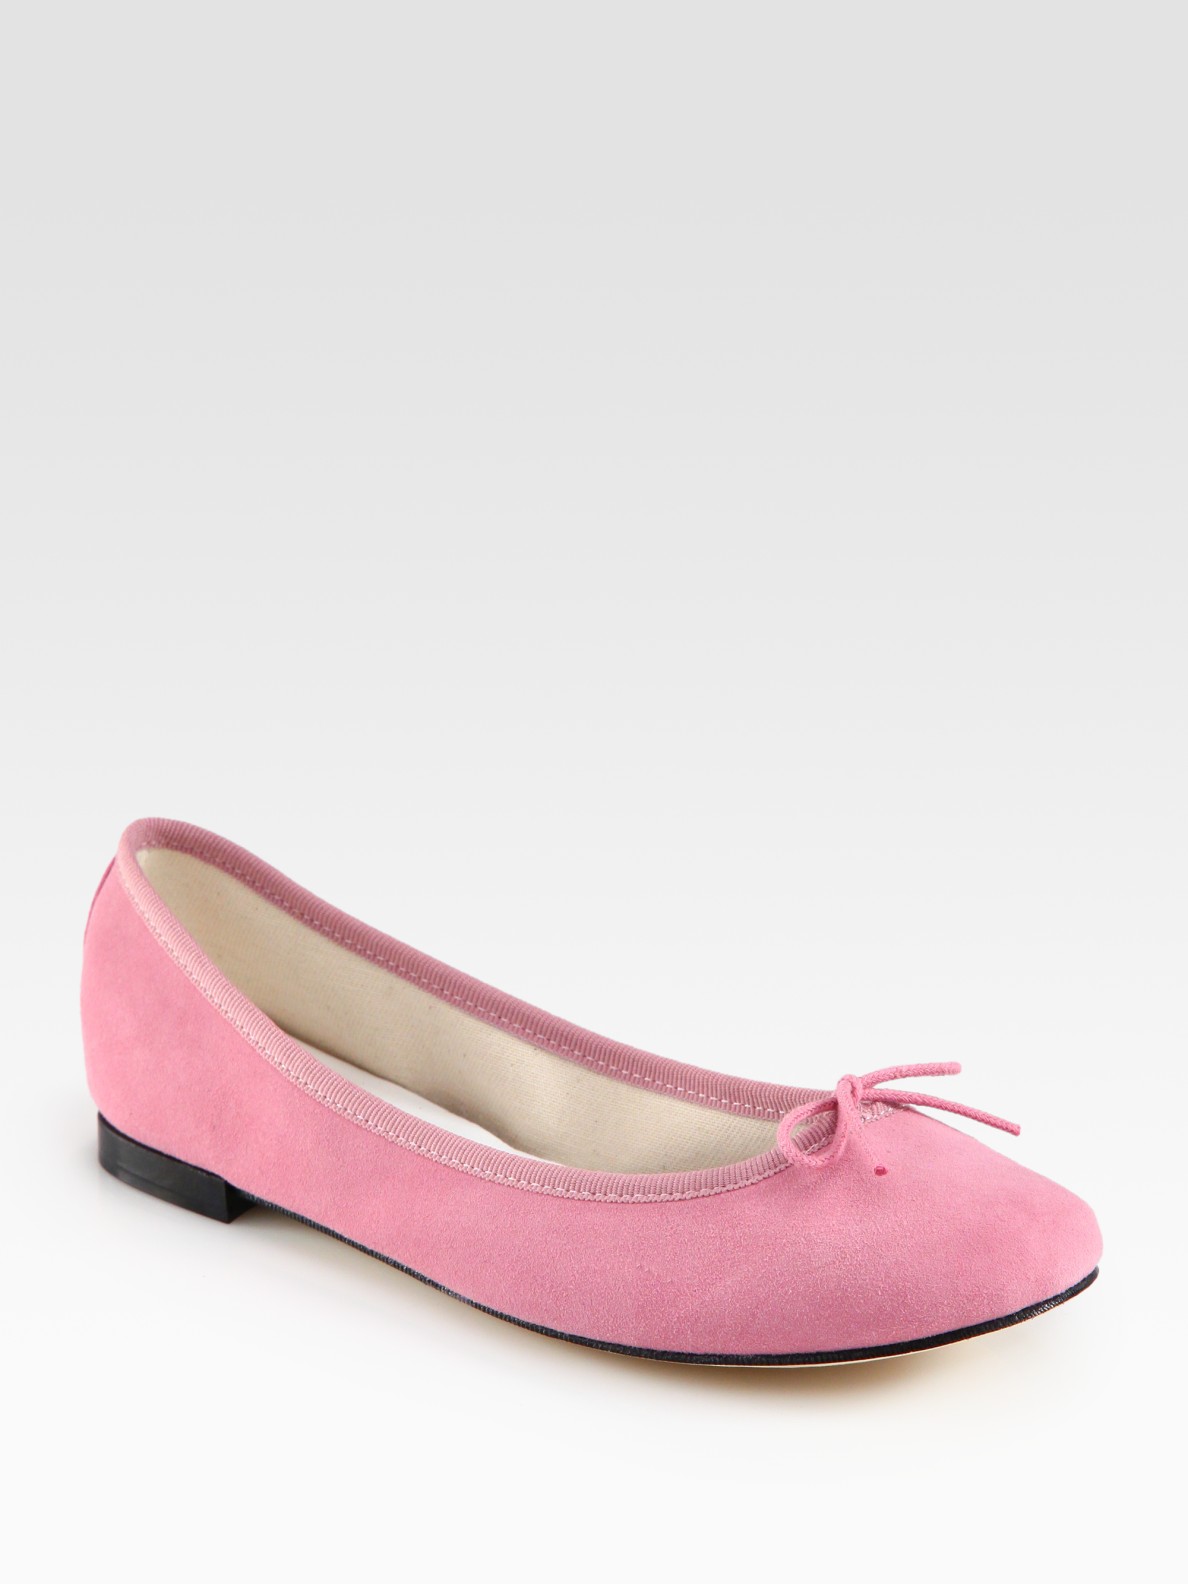 Repetto Suede Ballet Flats in Pink | Lyst